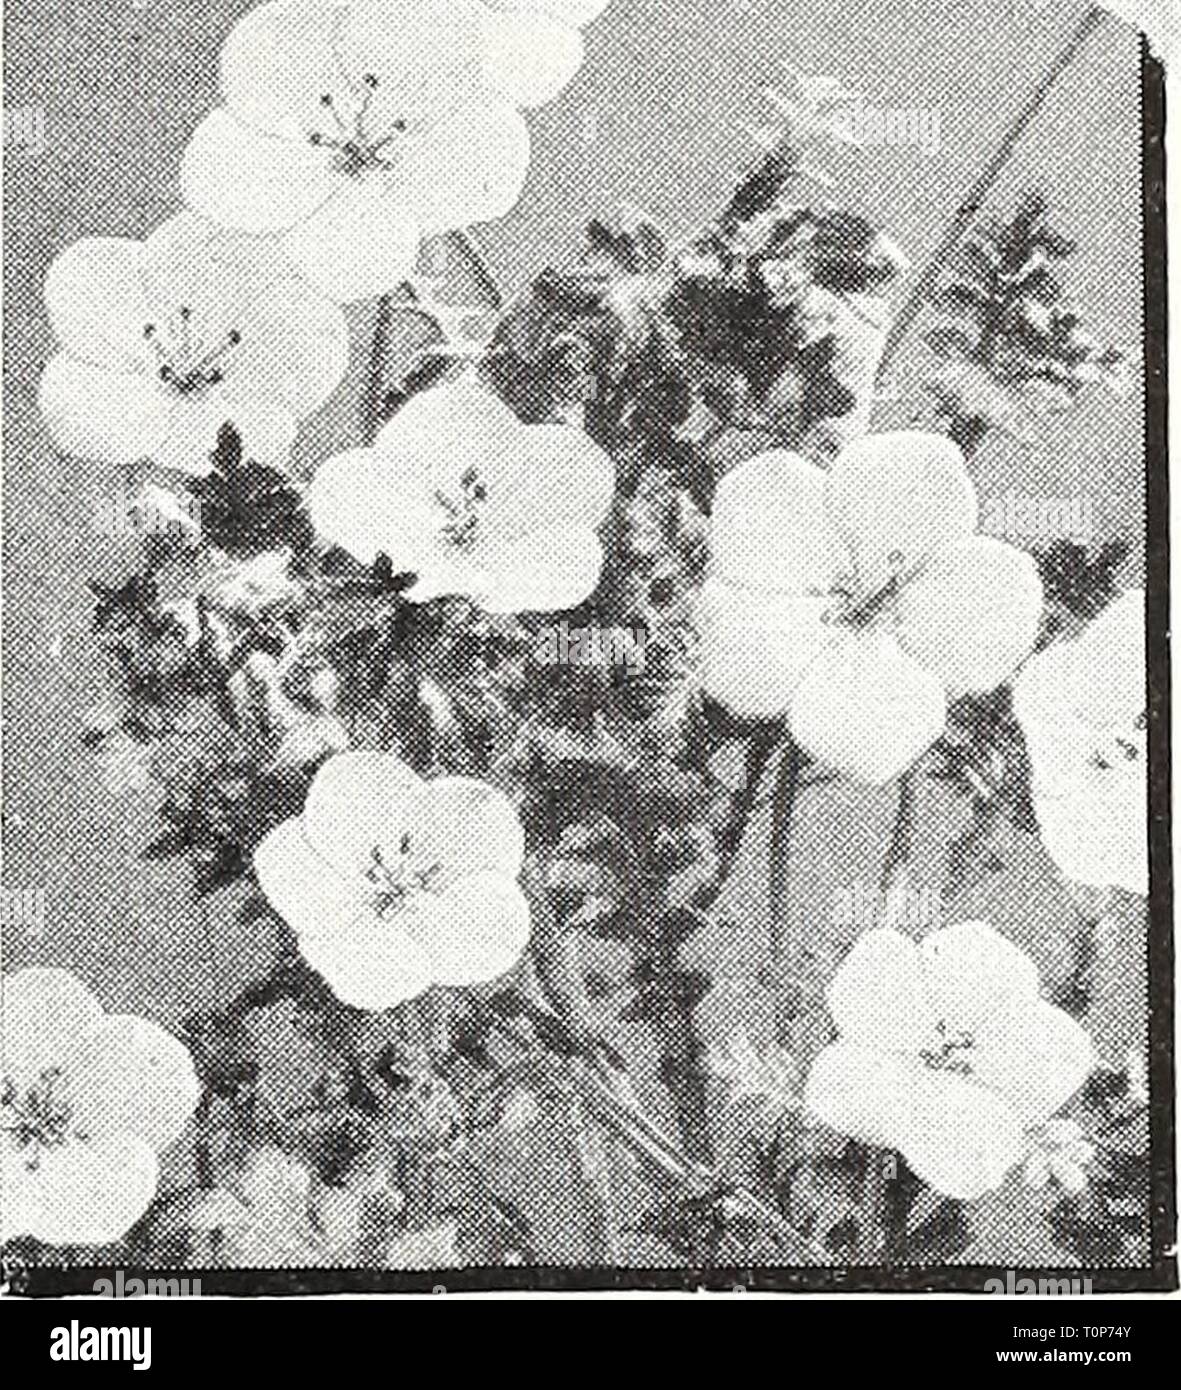 Dreer's 1950 (1950) Dreer's 1950  dreers19501950henr Year: 1950  J^IA Nasturtium —Double Gleam Hybrids Nierembergia—Bfue Cups Coerulea, 3159. (Hippomanica.) Charming 8-inch annual covered with cup-shaped lavender-blue flowers from mid- summer until frost. Splendid for dwarf MMMMmM beds, borders and rock gardens. Pkt. 20(/'. Purple Robe, 3161. Deep violet blooms on compact, free-flowering plants, 6 inches tall. Pkt. 25^. NEMOPHILA, Insignis Blue, 3143. (Baby Blue Eyes.) A charming annual with grace- ful light blue flax-like flowers. Blooms all summer. 8 inches. Pkt. 10^?. NIGELLA, Miss Jekyll,  Stock Photo